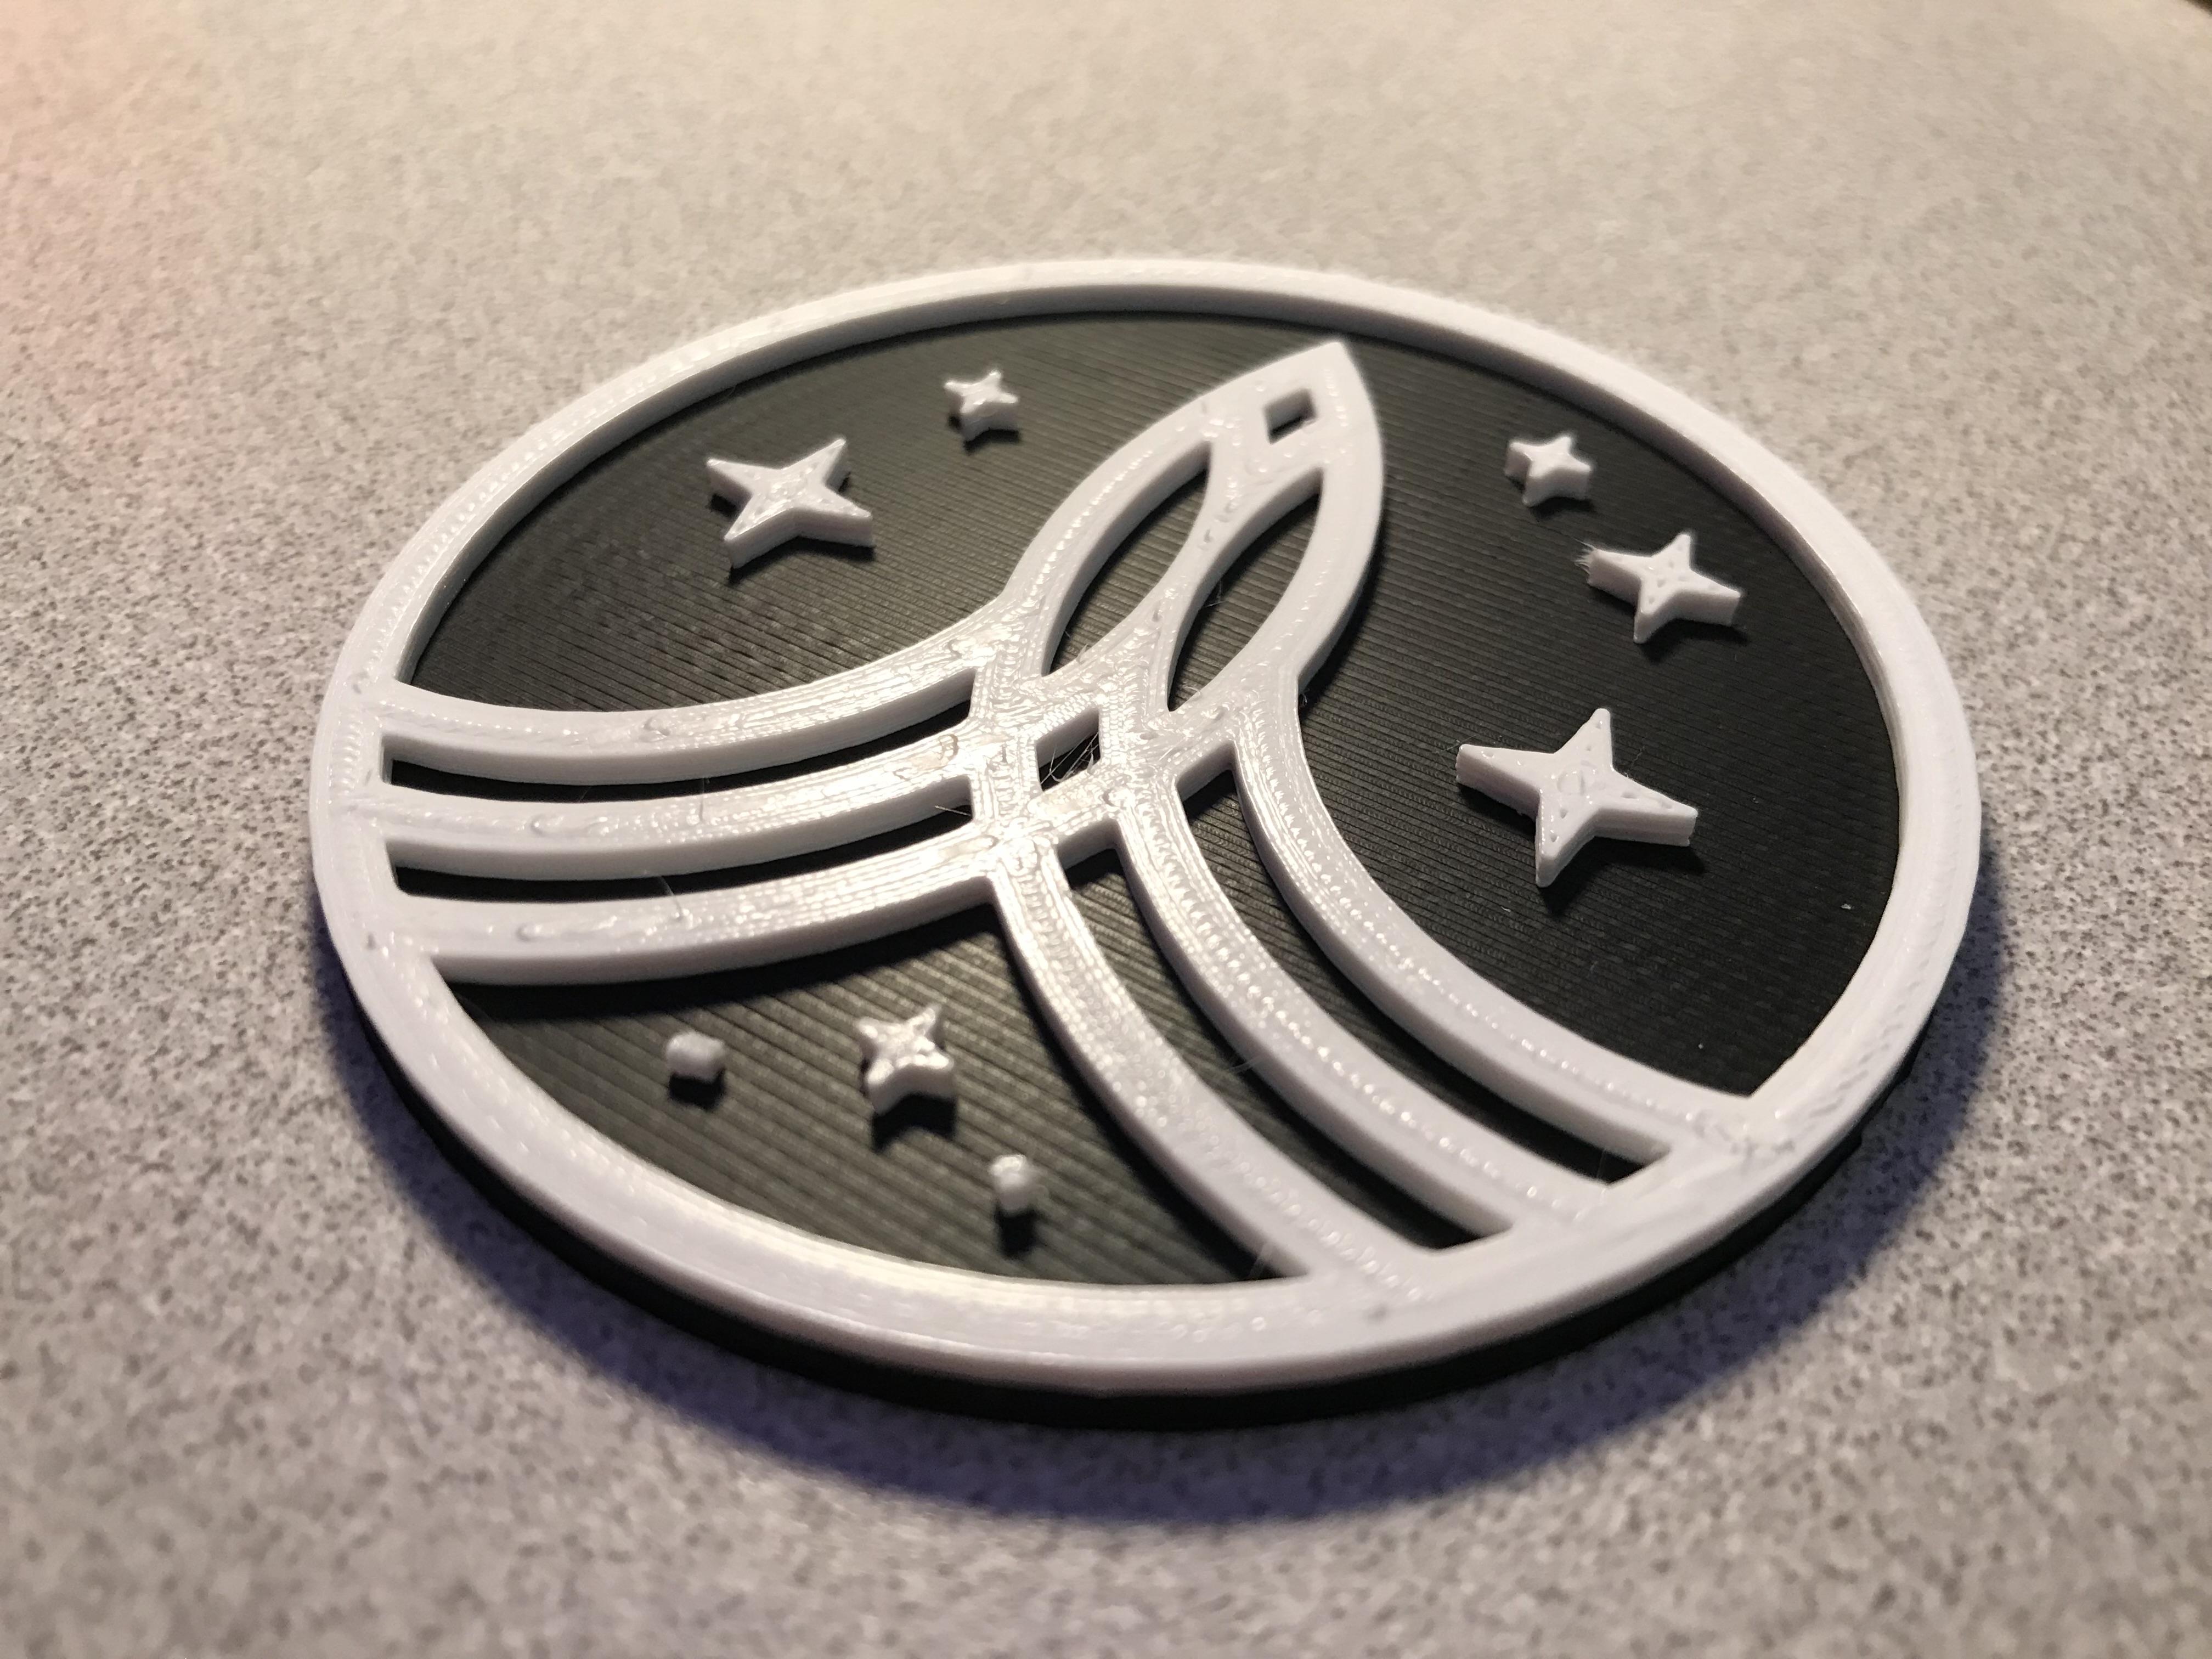 The Orville Command Patch